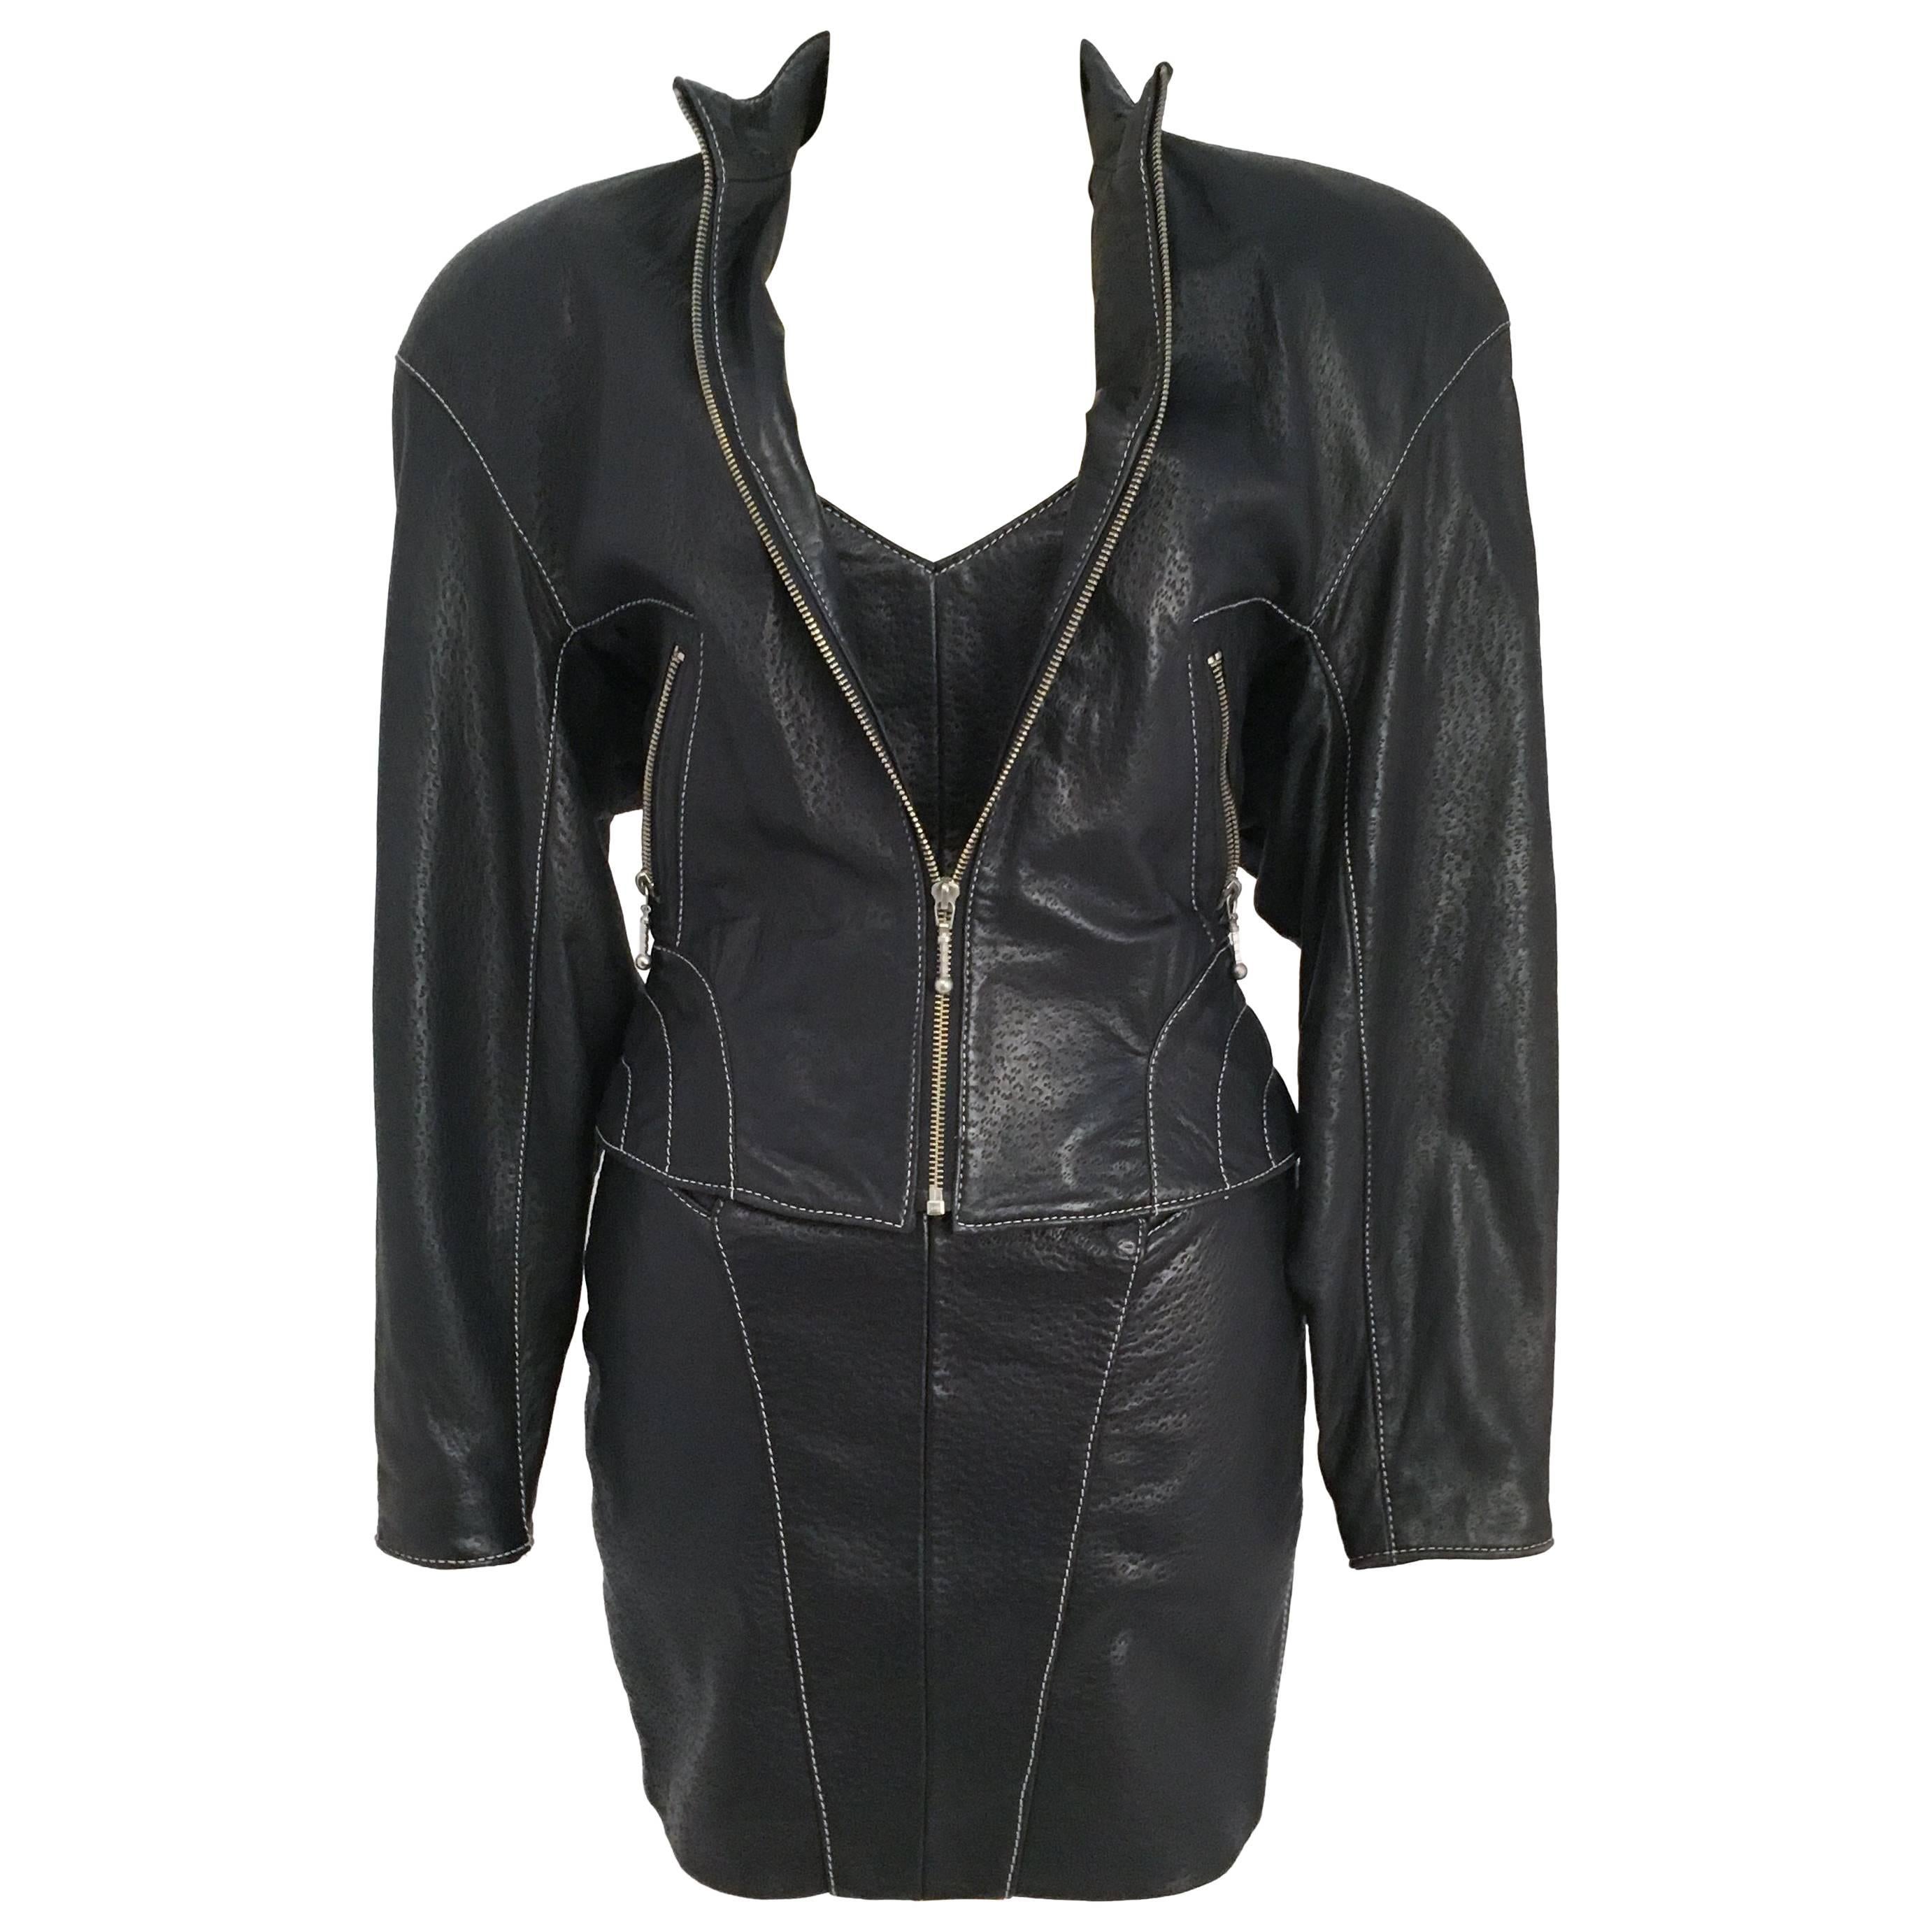 80s Michael Hoban North Beach Leather Black Lamb Skin Dress & Jacket Set. Strapless minidress w/ open back detail, back zip and buckle closure. Contrast white threads on black leather shows off shape of body. High collar jacket with two front